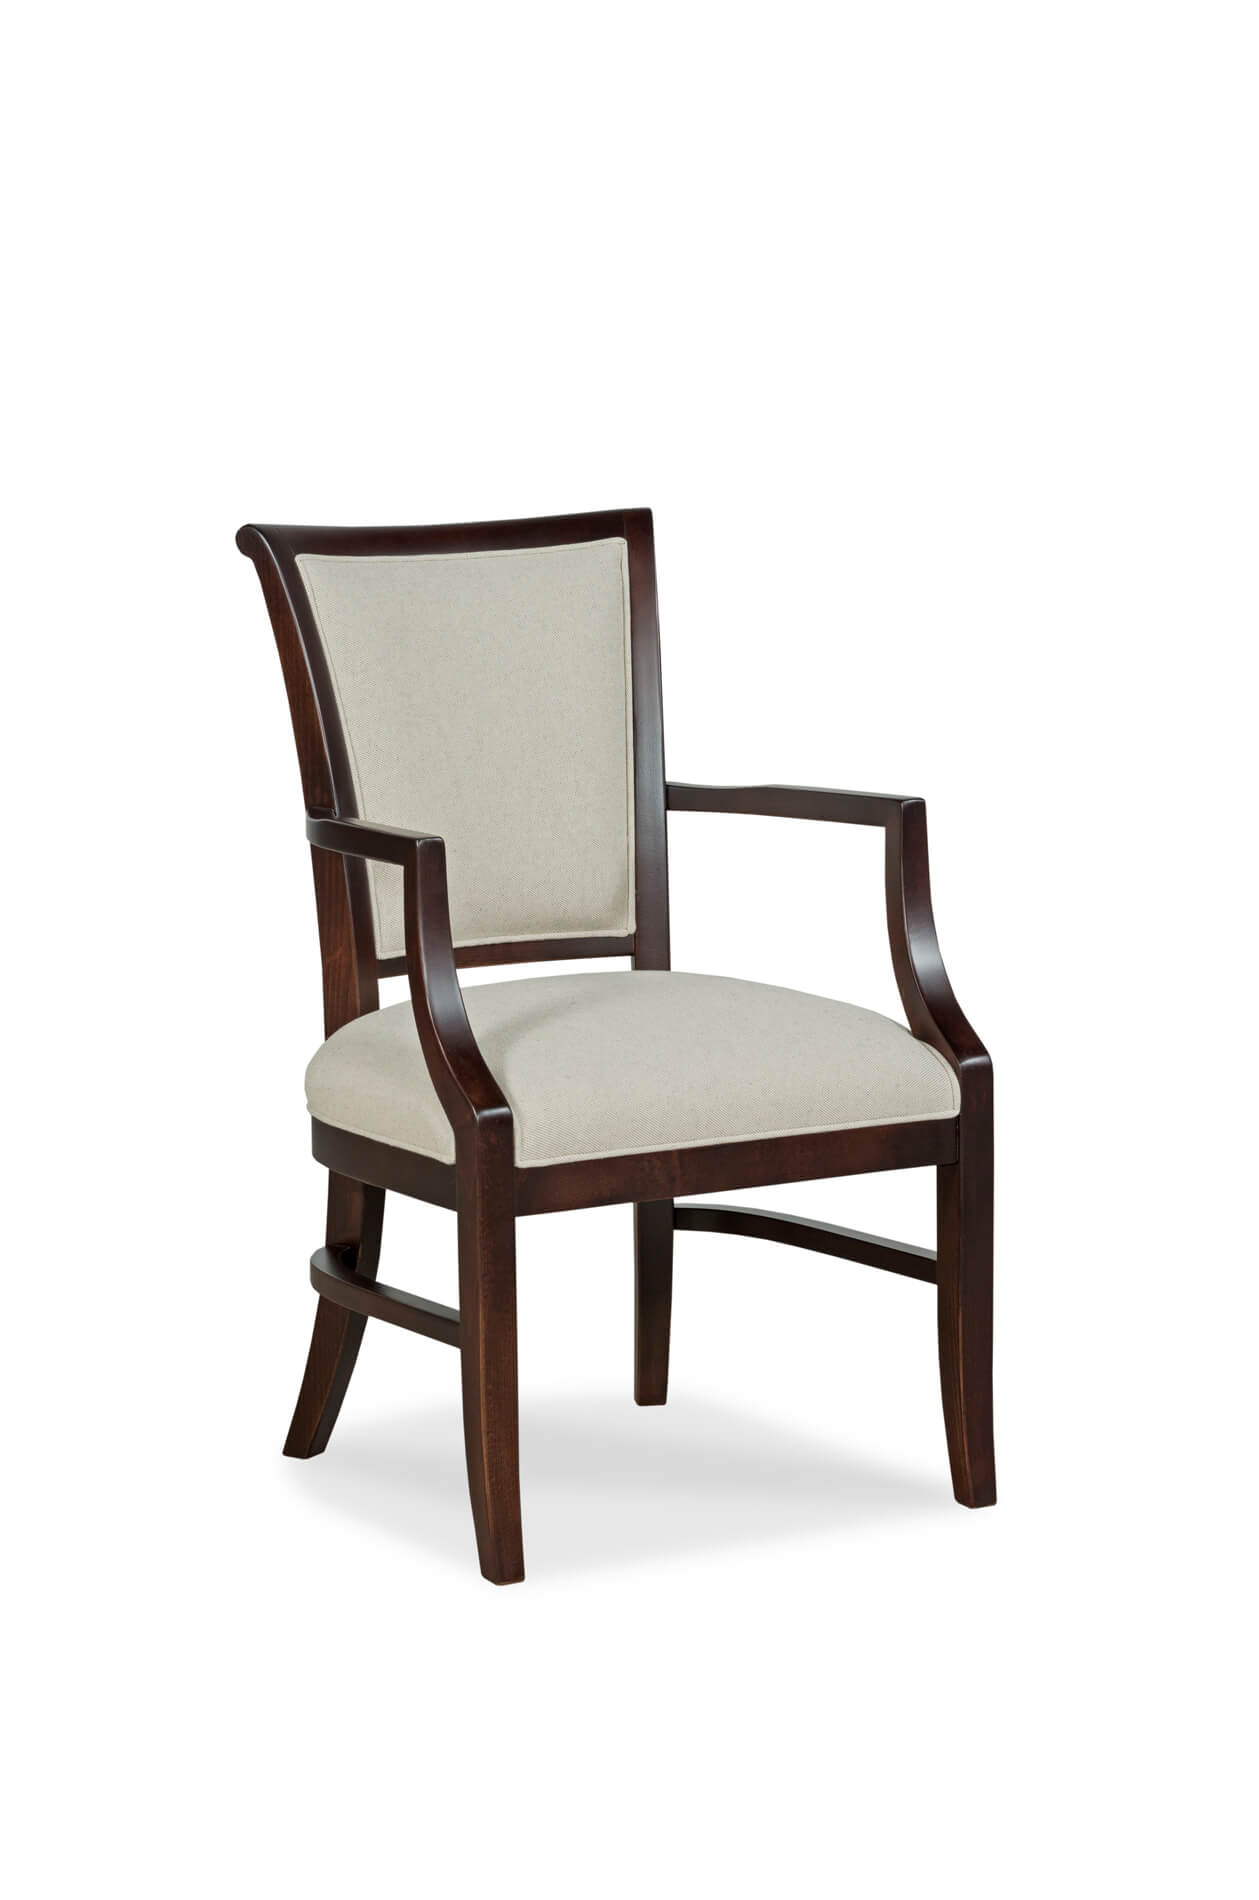 Mackay Upholstered Dining Arm Chair, Padded Wooden Dining Chairs